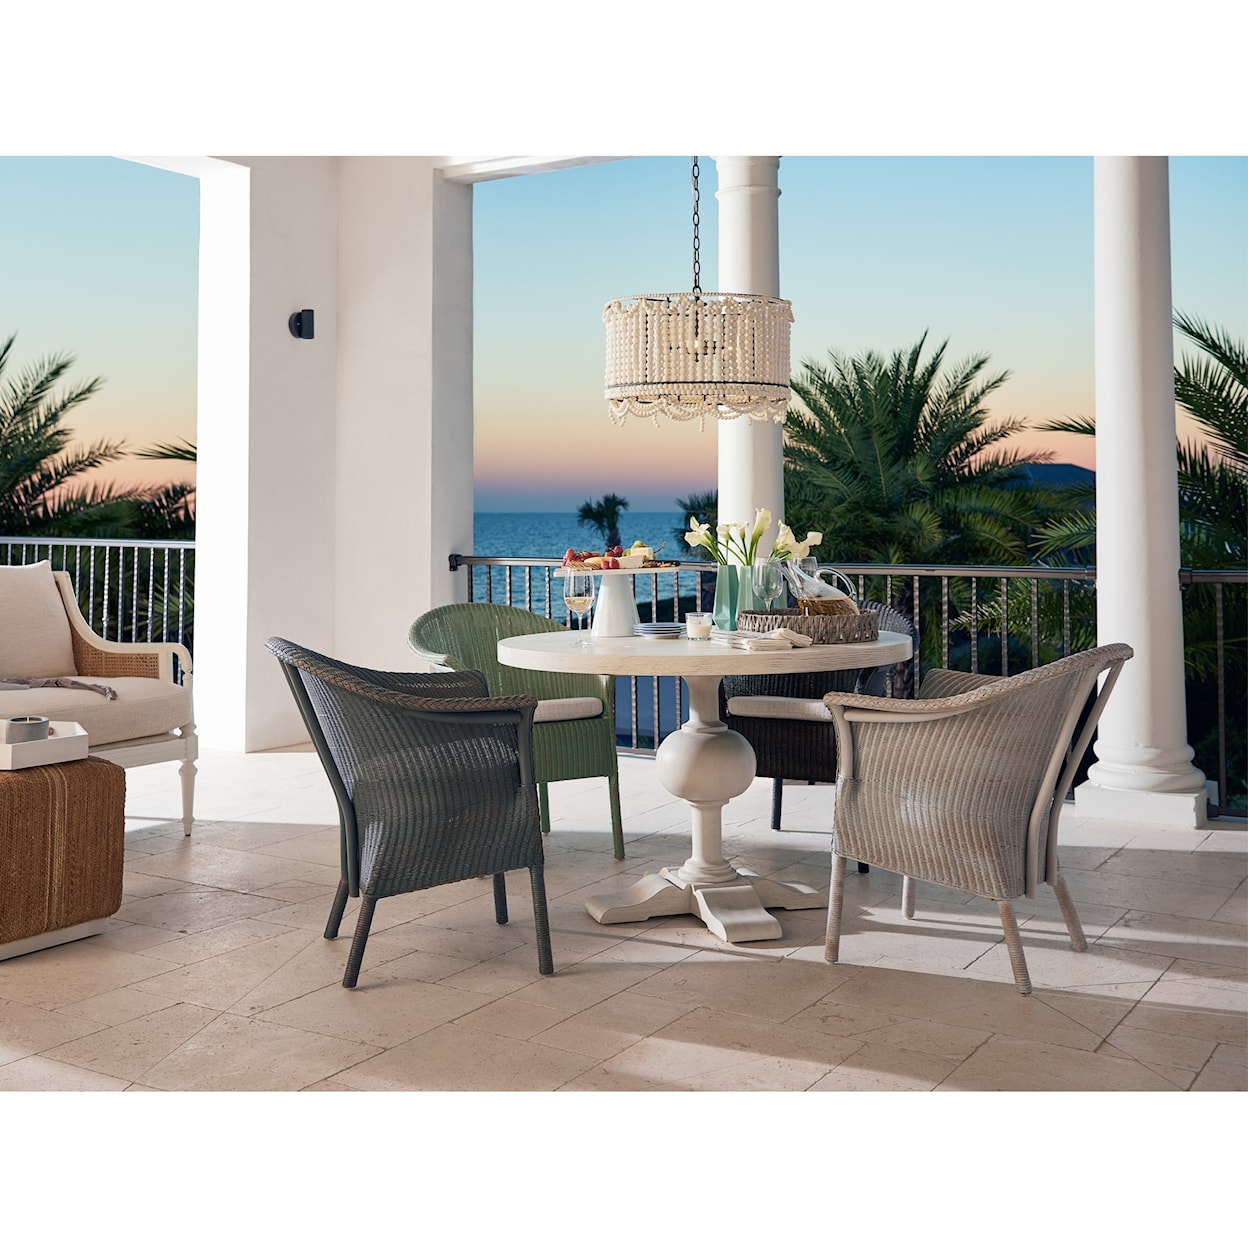 Universal Coastal Living Home - Escape Bar Harbor Dining and Accent Chair